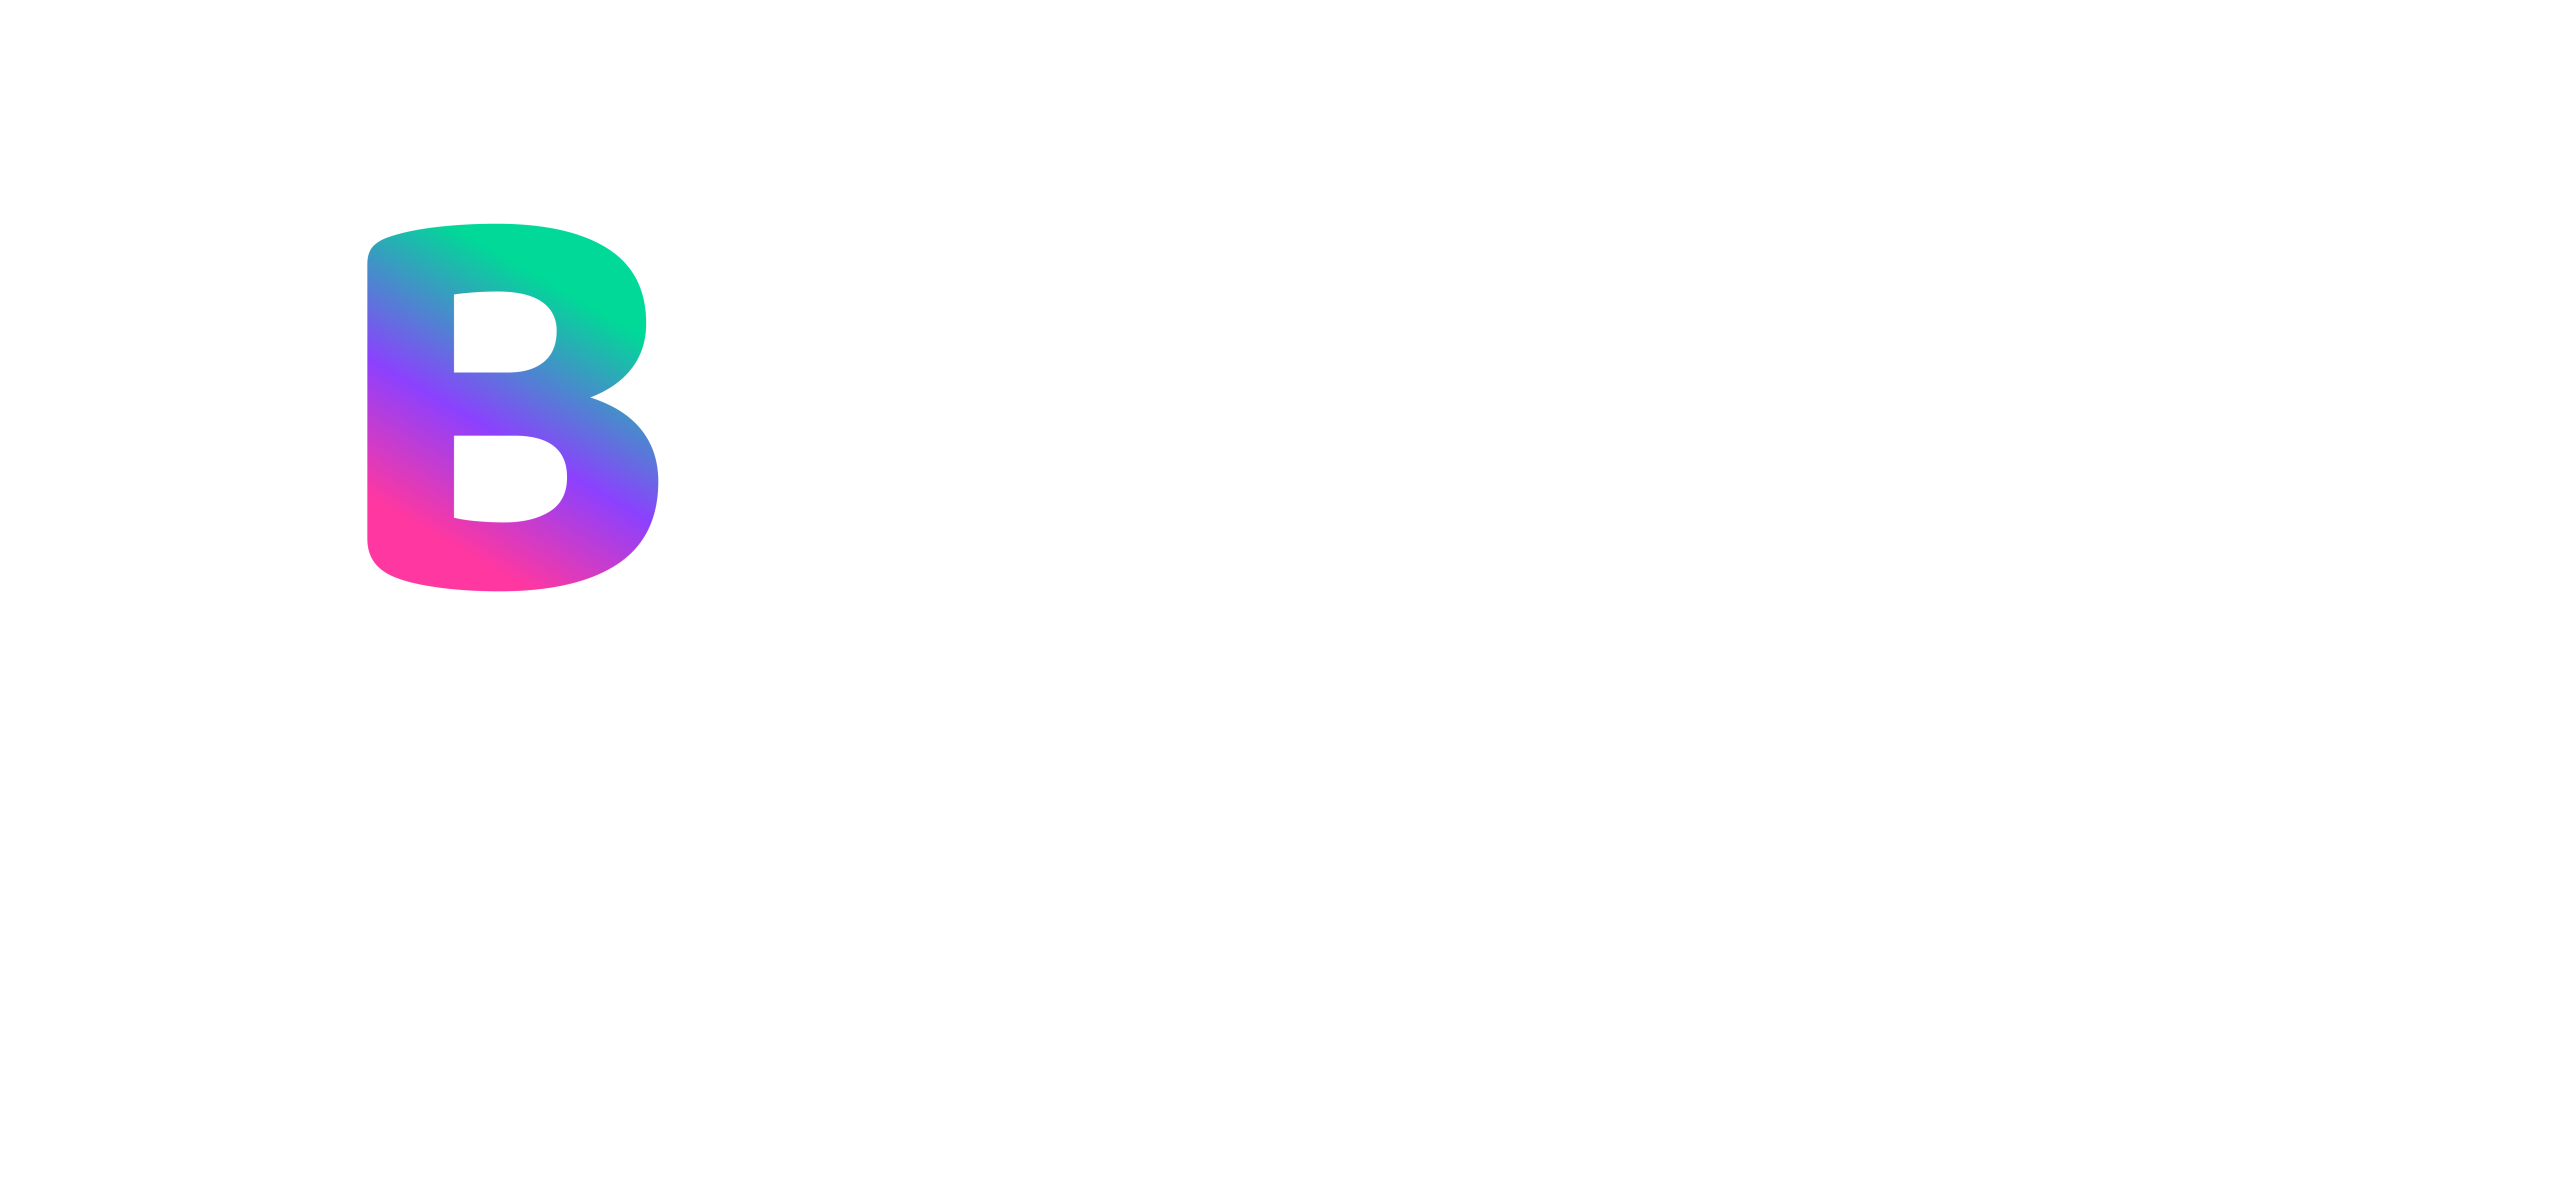 Bizbie Logo: Find things to do near me and support local